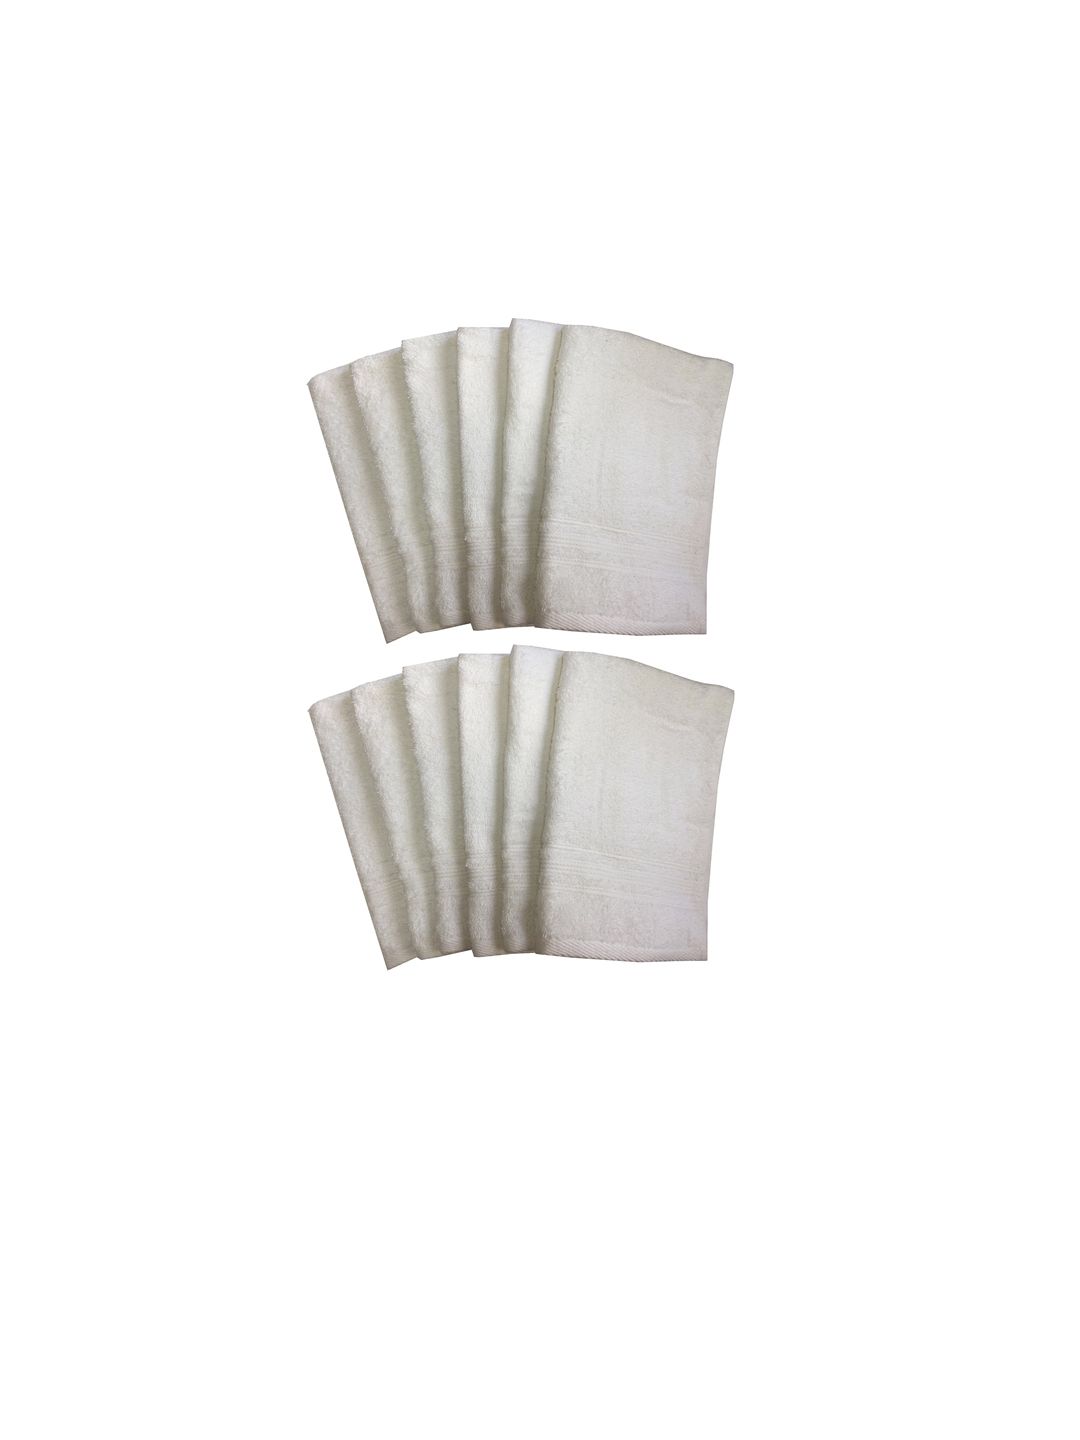 Lushomes Set Of 12 White Solid 450 GSM Cotton Hand Towels Price in India